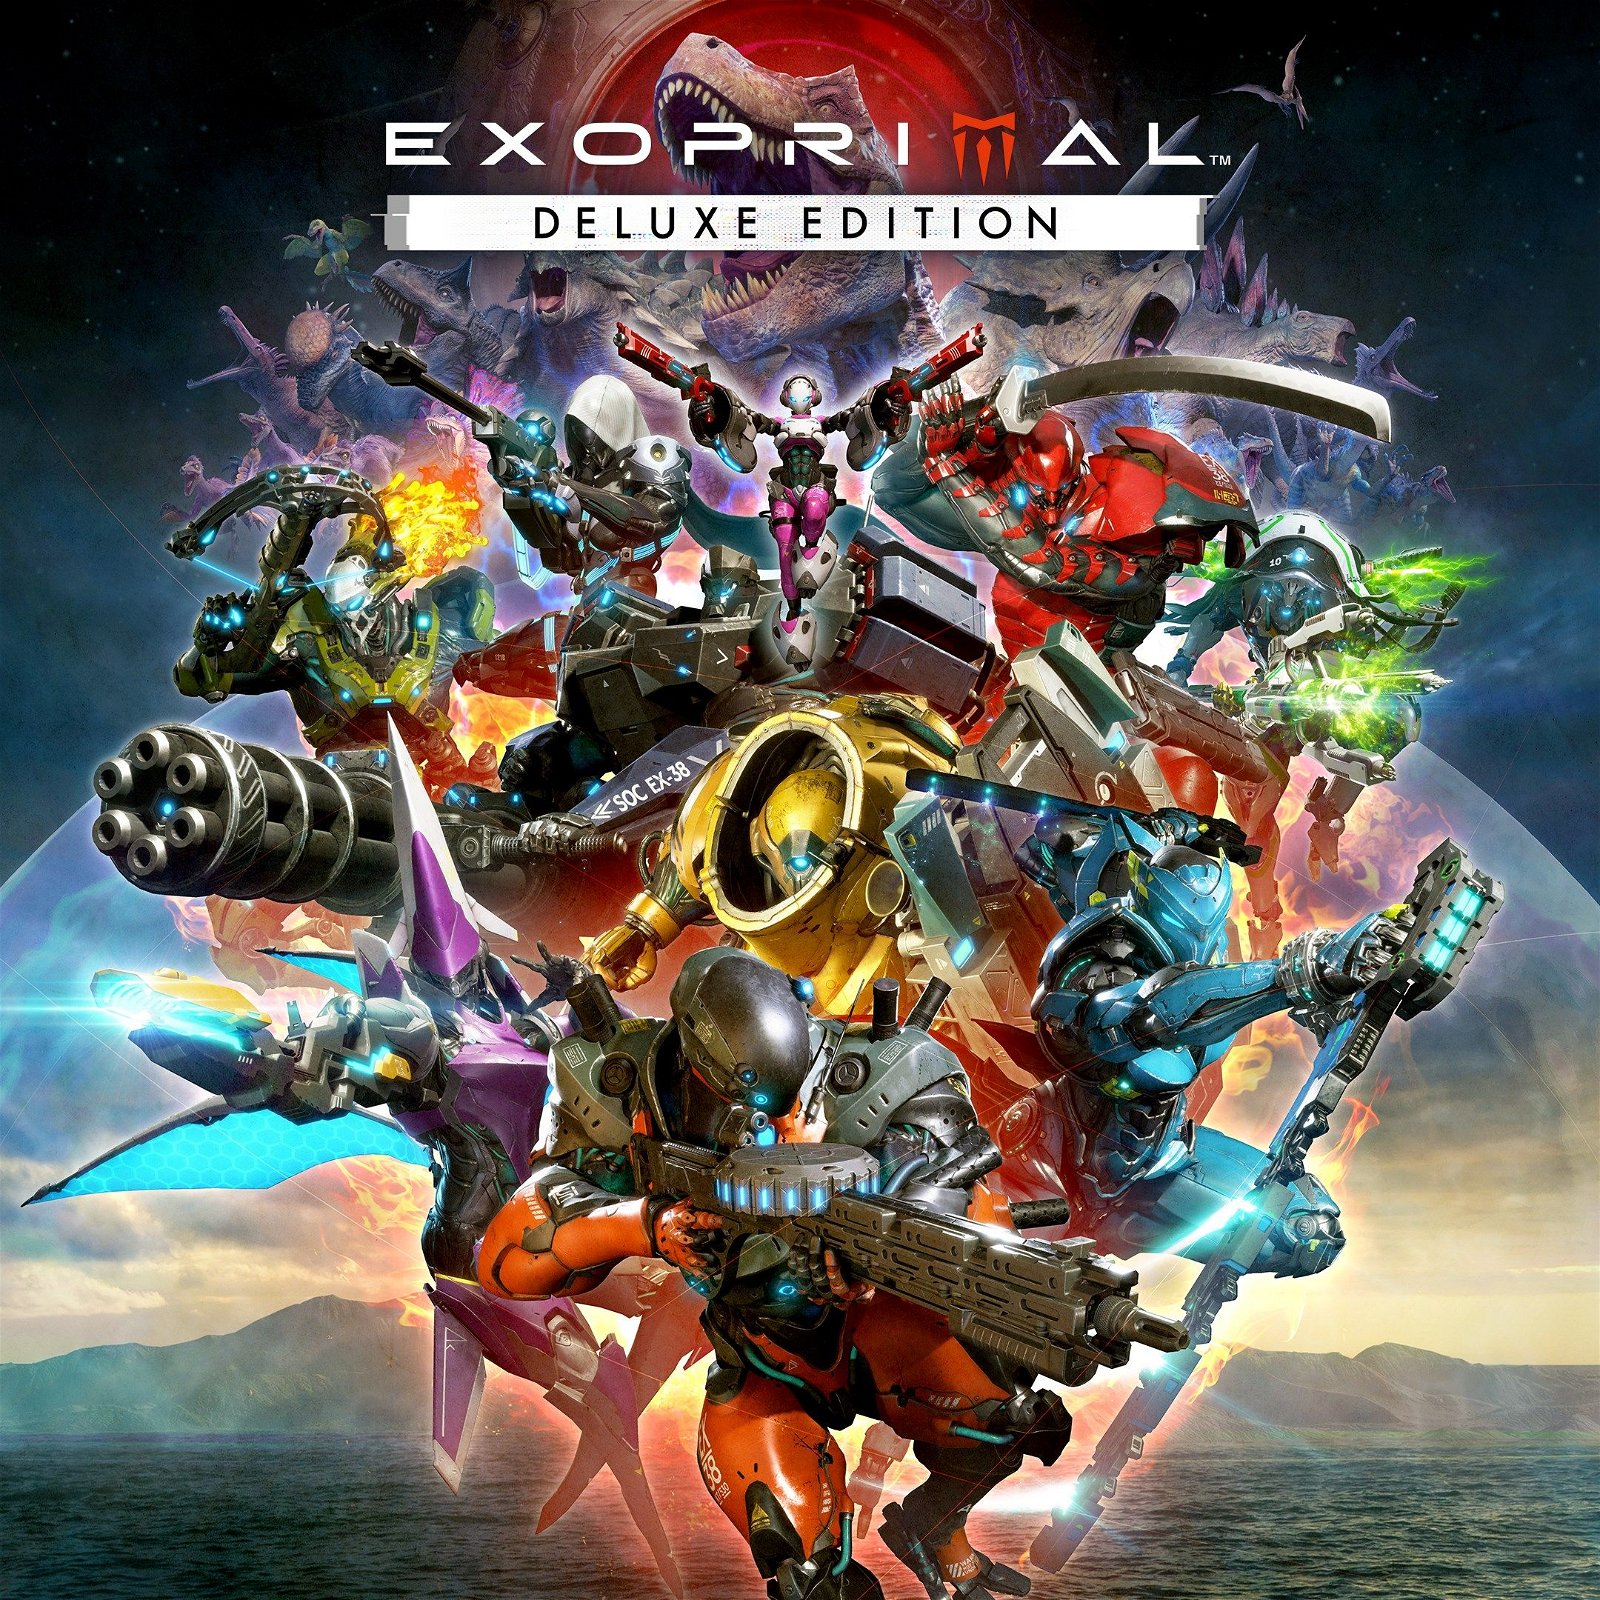 Image of Exoprimal Deluxe Edition